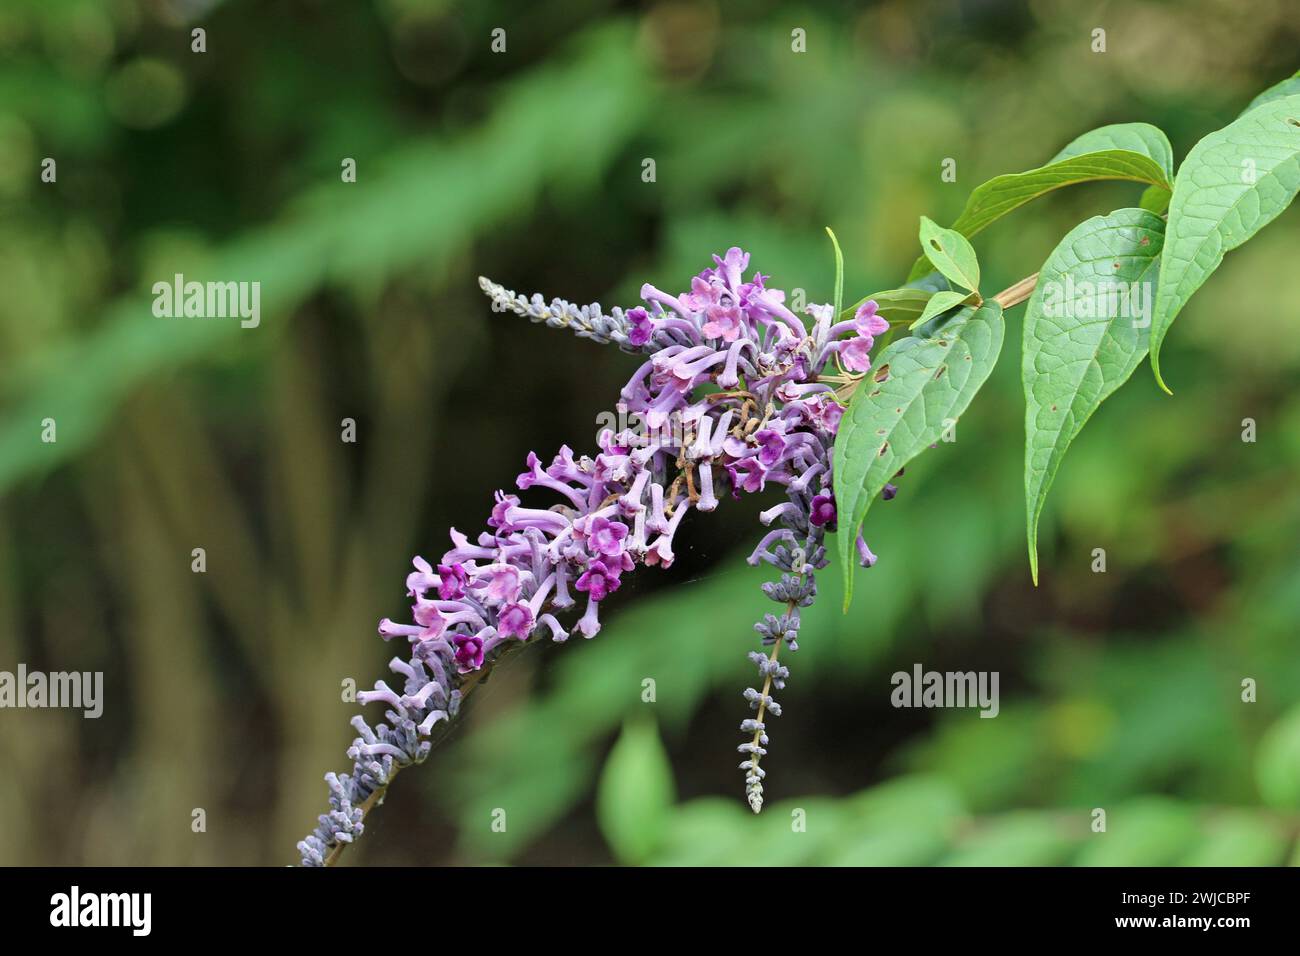 Purple butterfly bush, thought to be Buddleja curviflora, flower panicle with a background of blurred leaves. Stock Photo